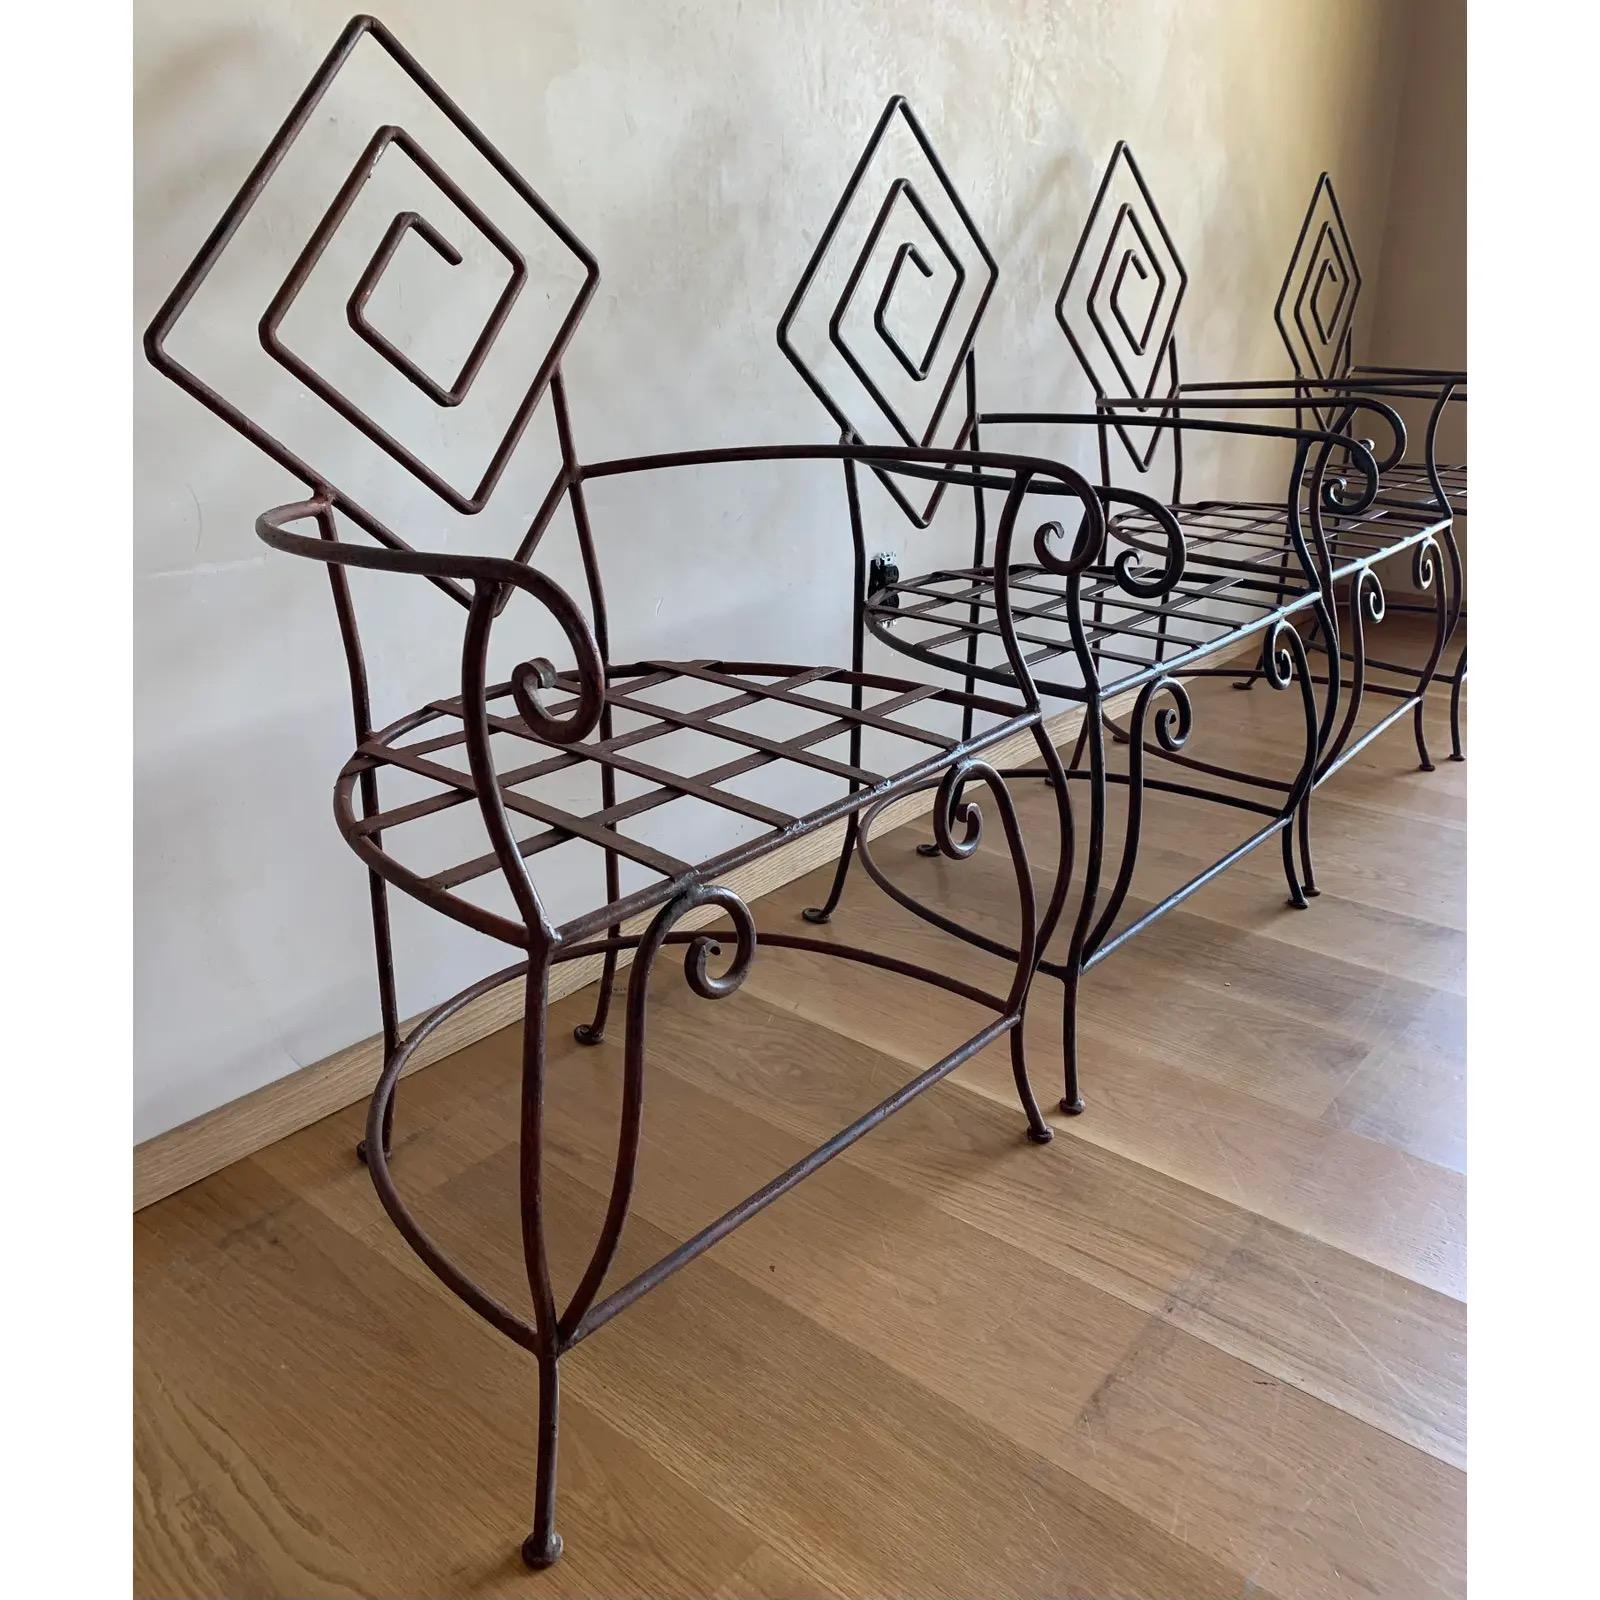 Welded Vintage Artisan Iron Geometric Sculptural Frank Lloyd Wright Style Armchairs-4 For Sale